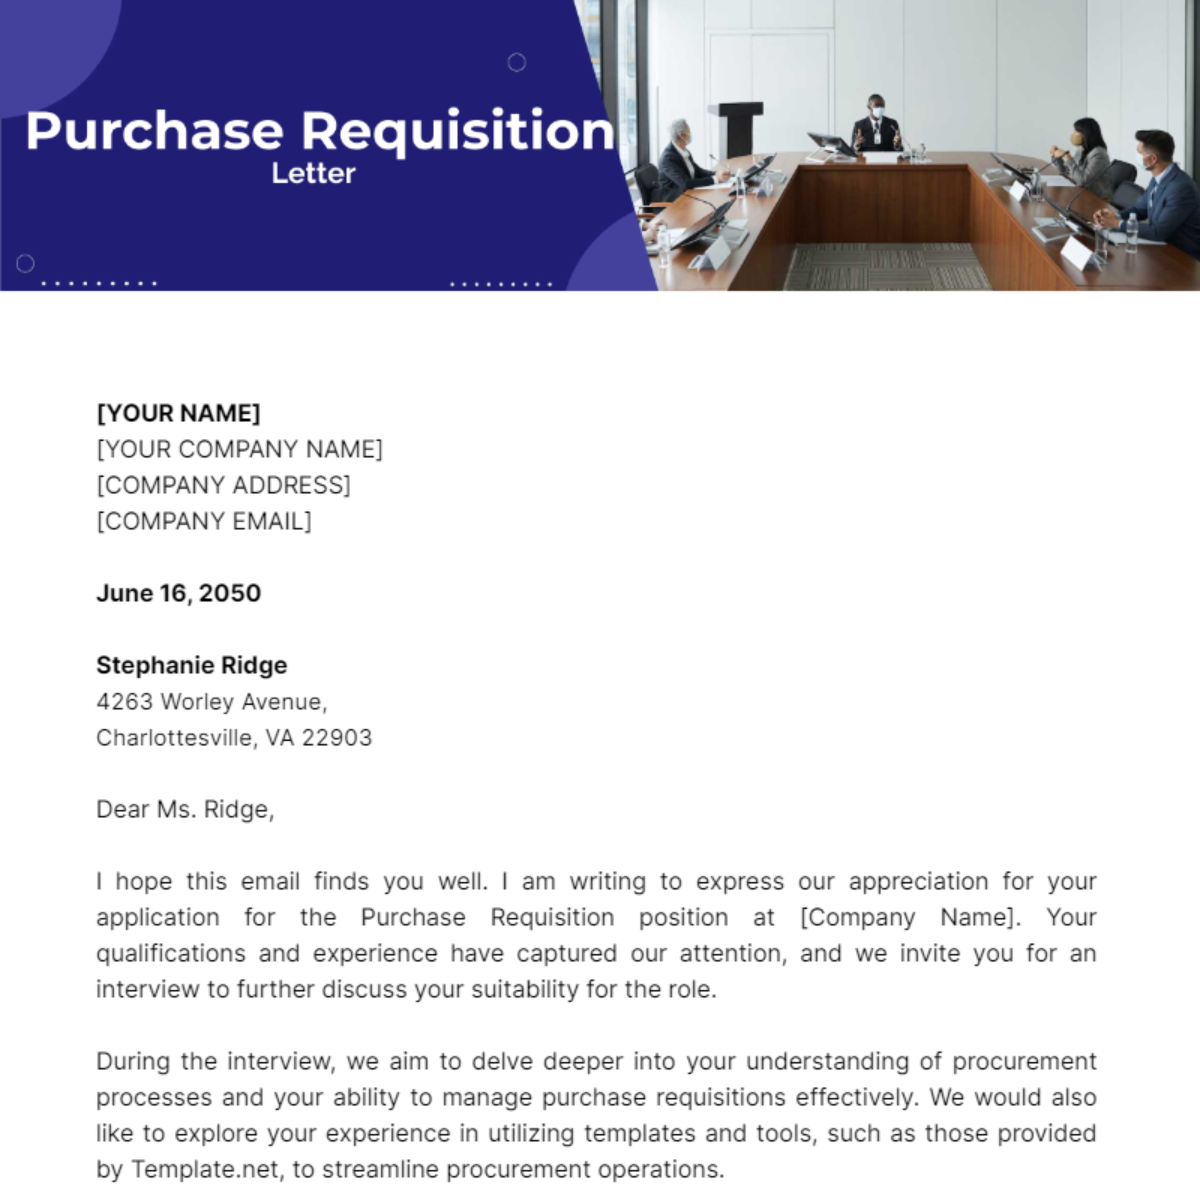 Purchase Requisition Letter Template